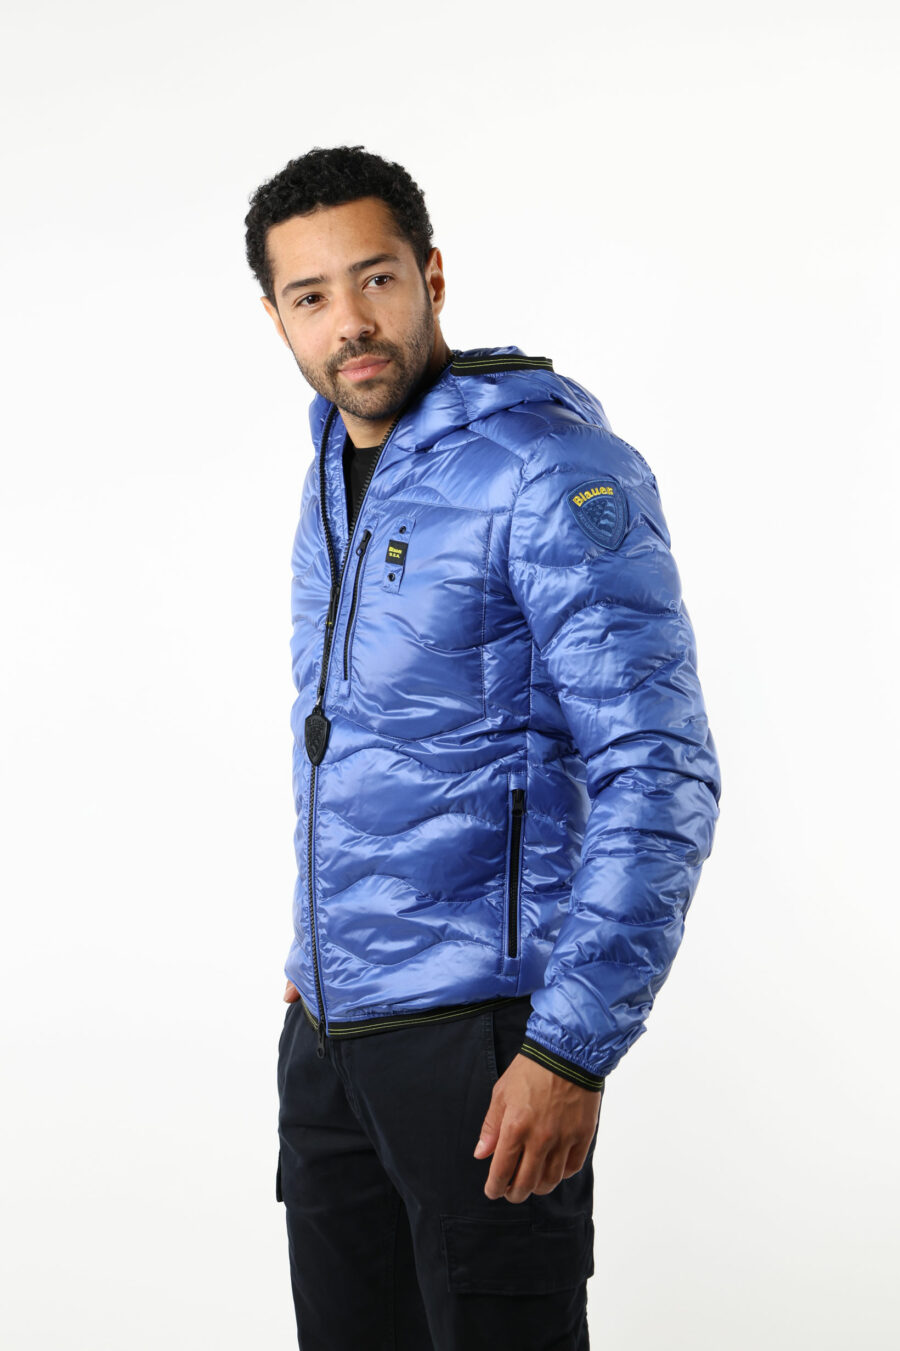 Blue jacket with diagonal lines and hood - 111443